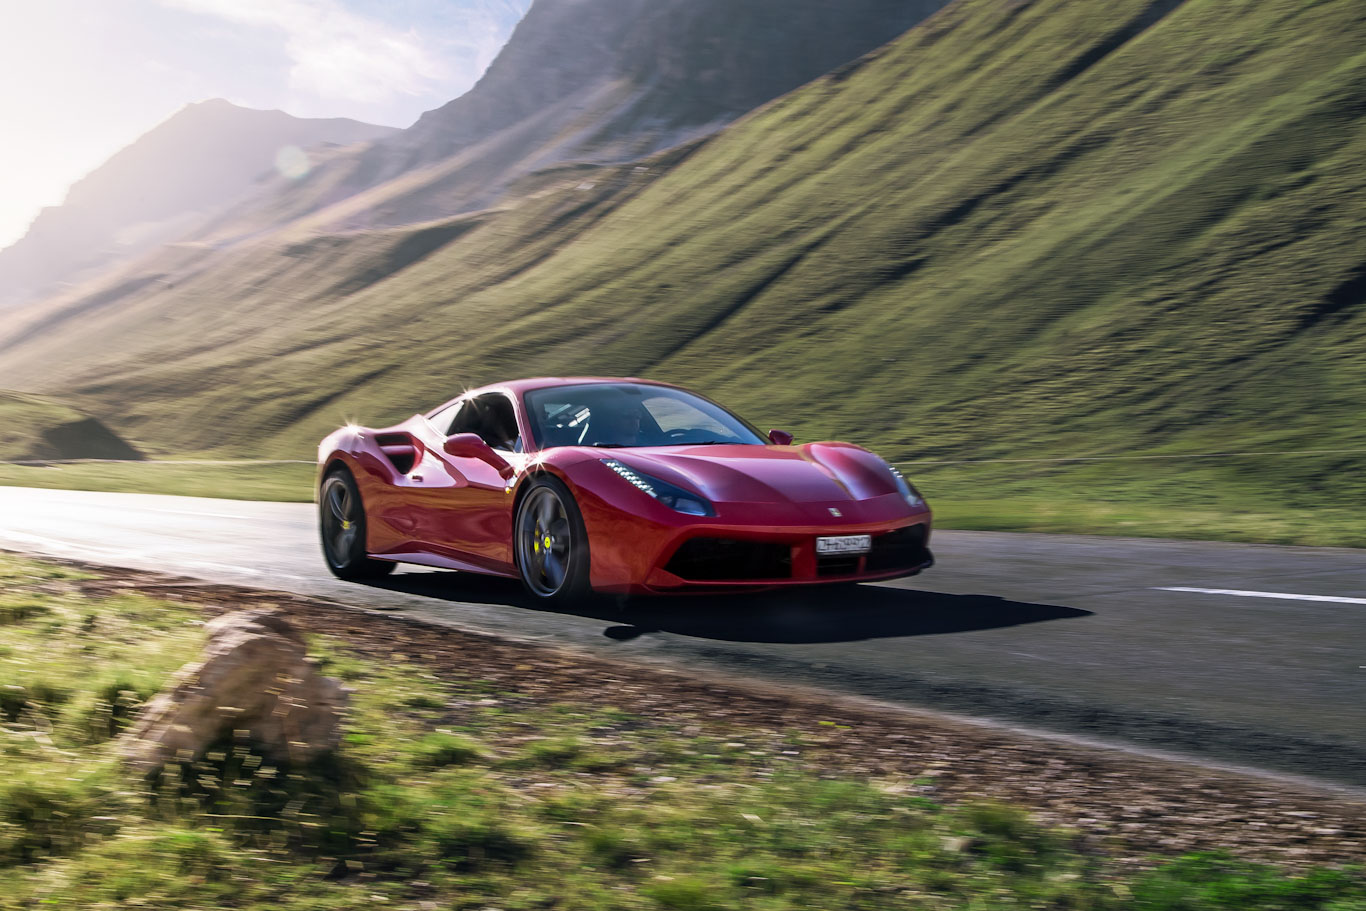 Top 10 Driving Roads Europe  - Albula Pass 458 Speciale